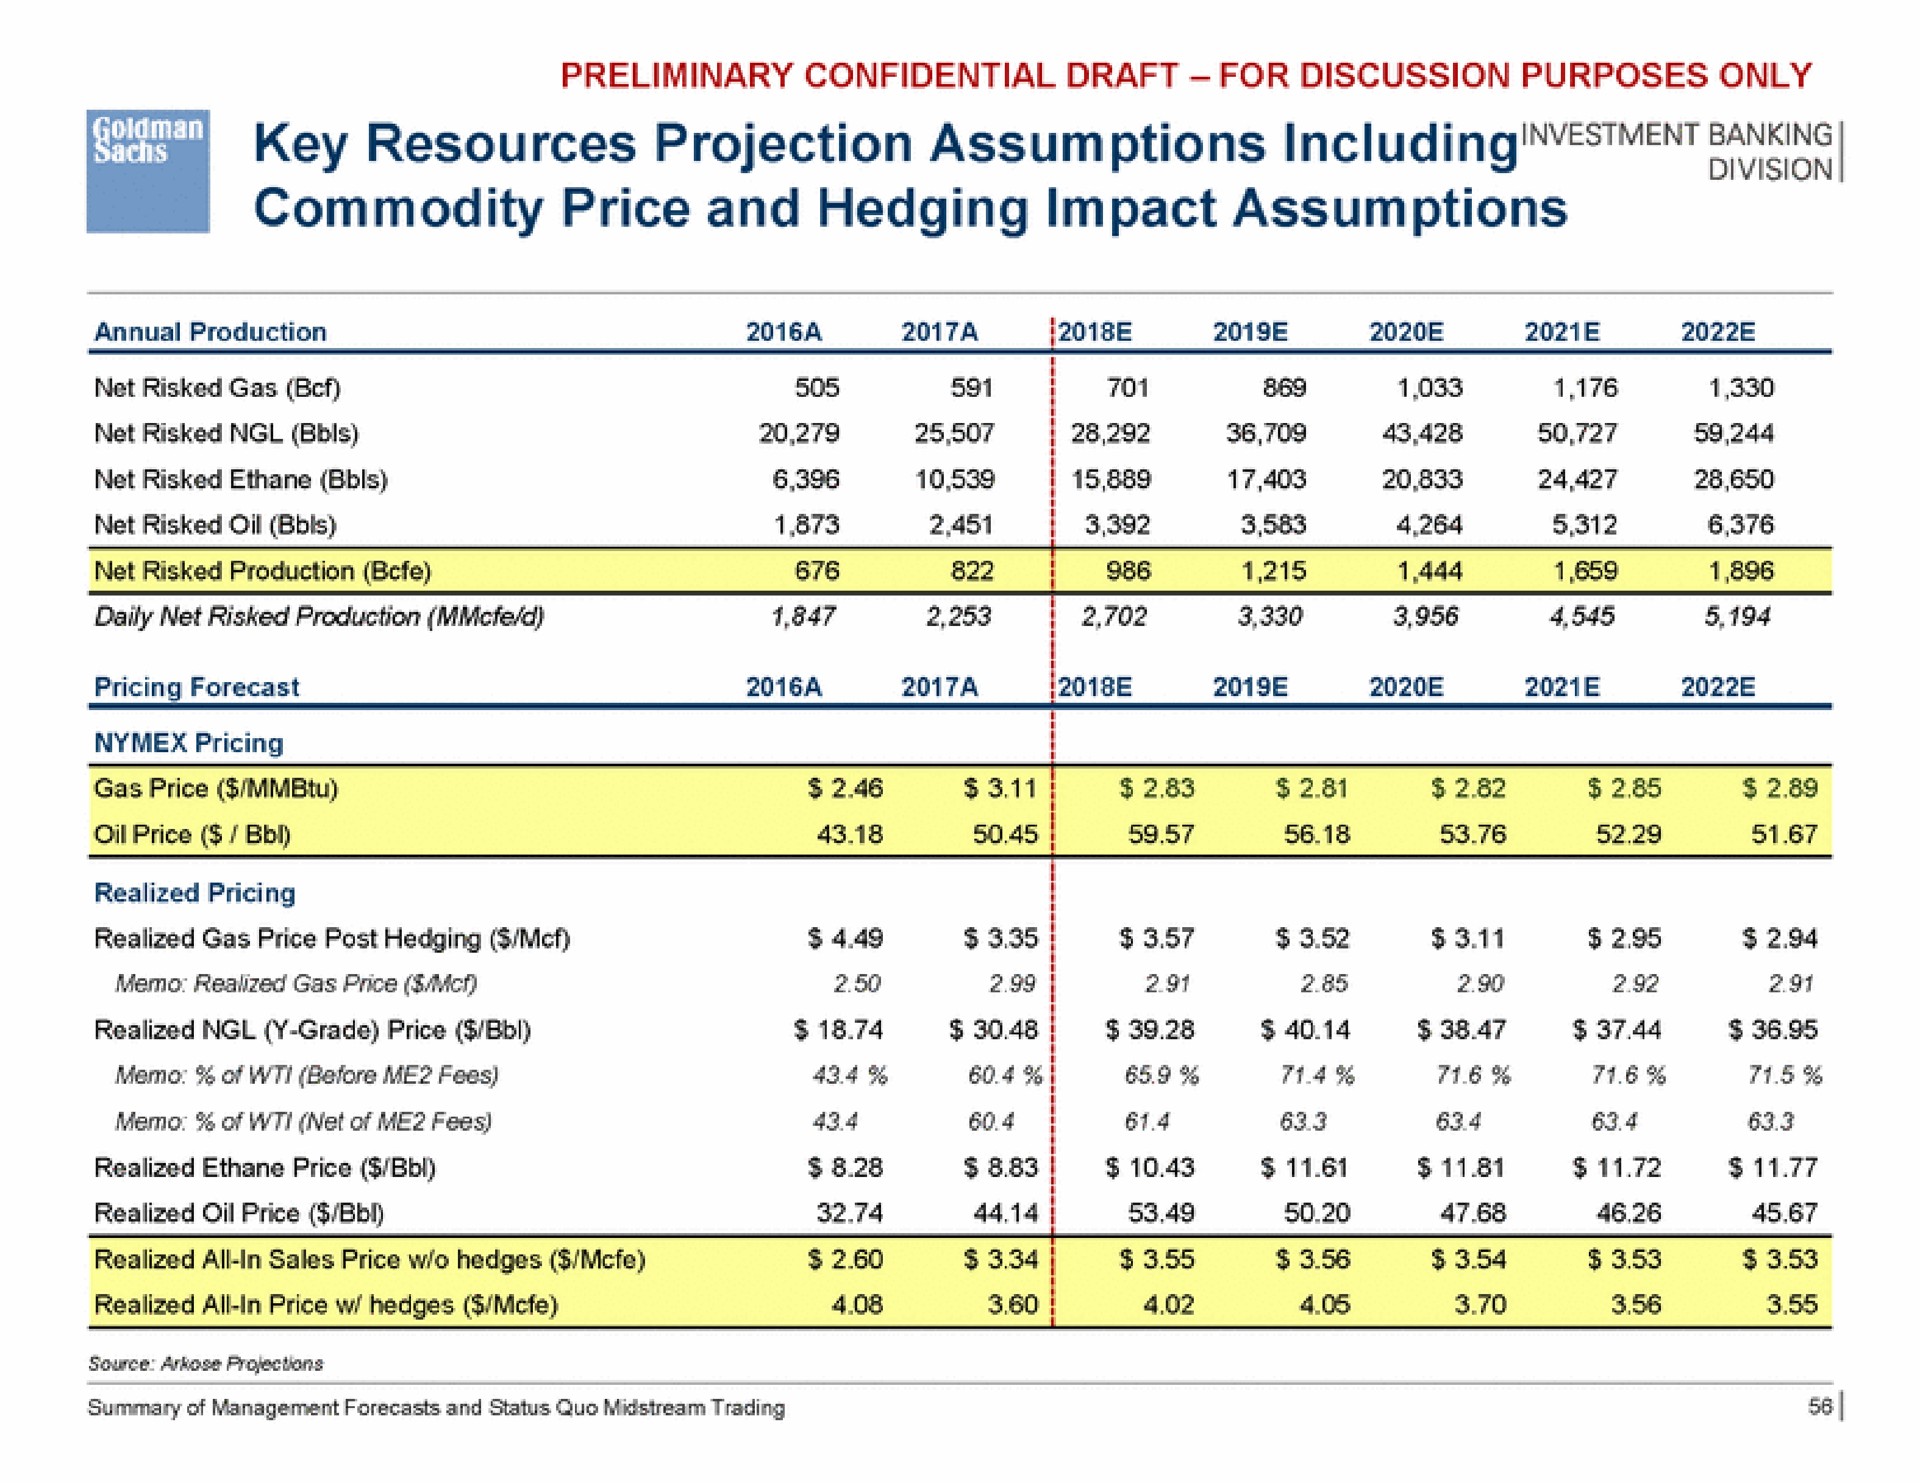 key resources projection assumptions including commodity price and hedging impact assumptions | Goldman Sachs